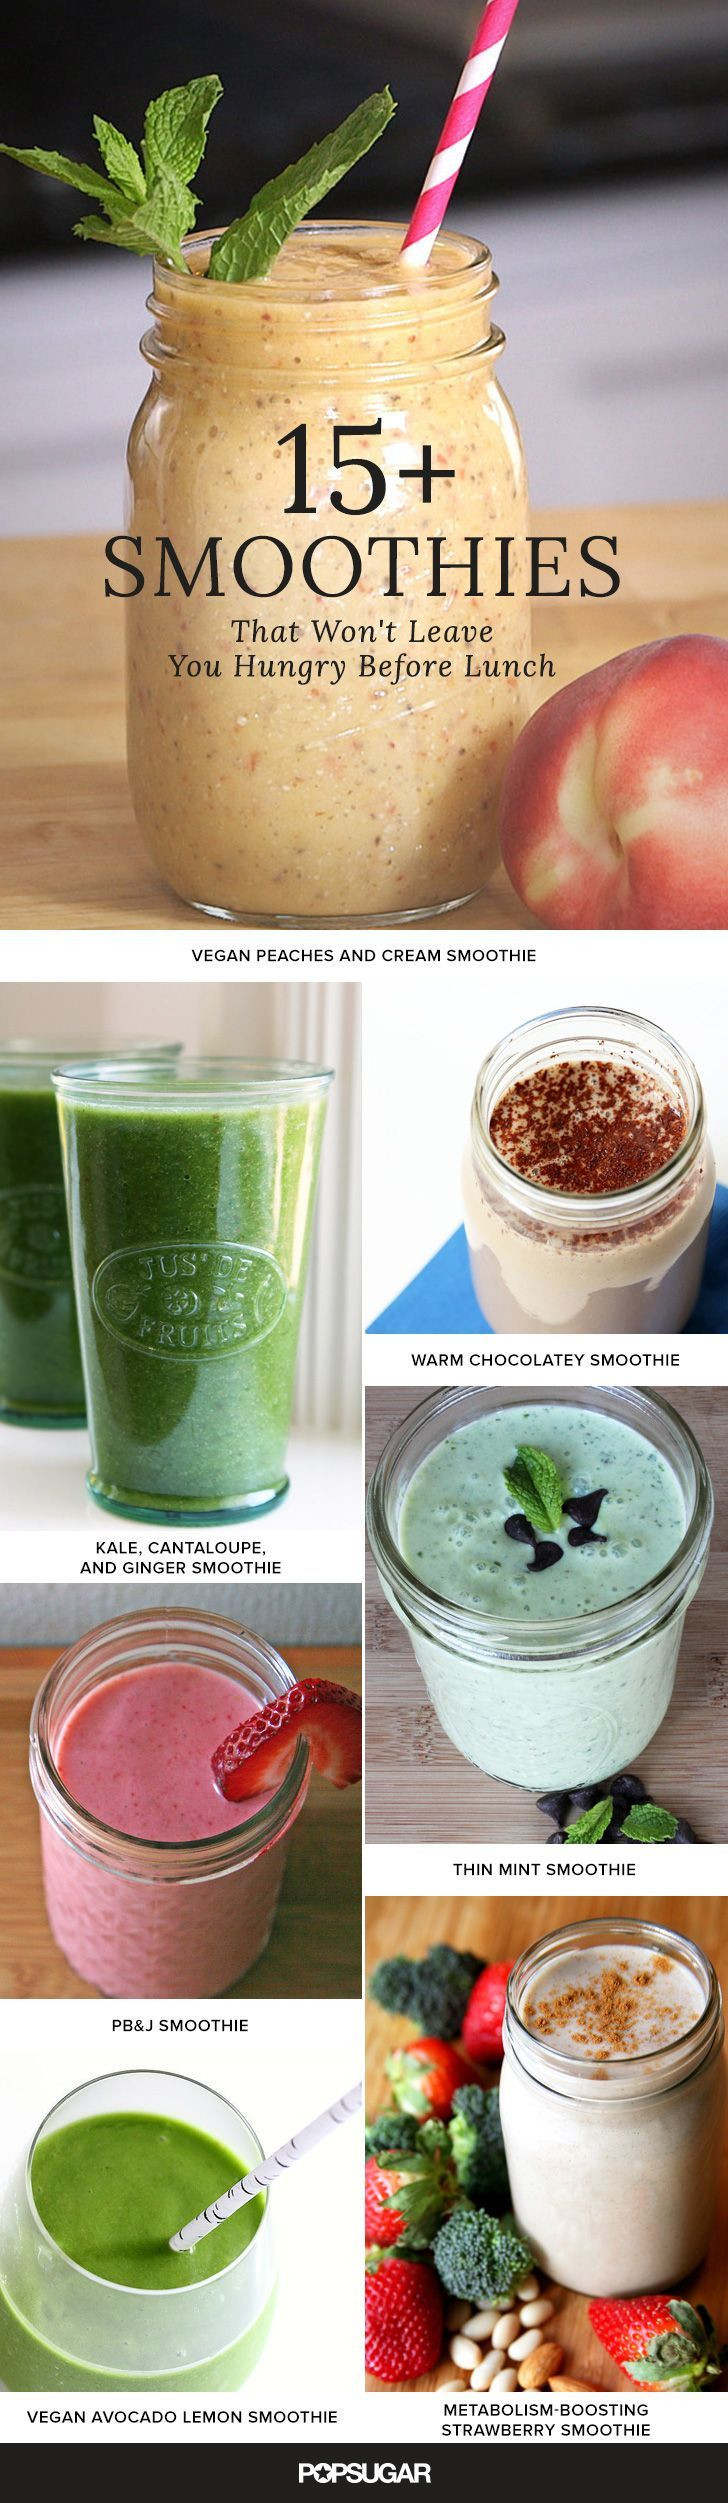 Healthy Lunch Smoothies
 Best 25 Meal replacement smoothies ideas on Pinterest